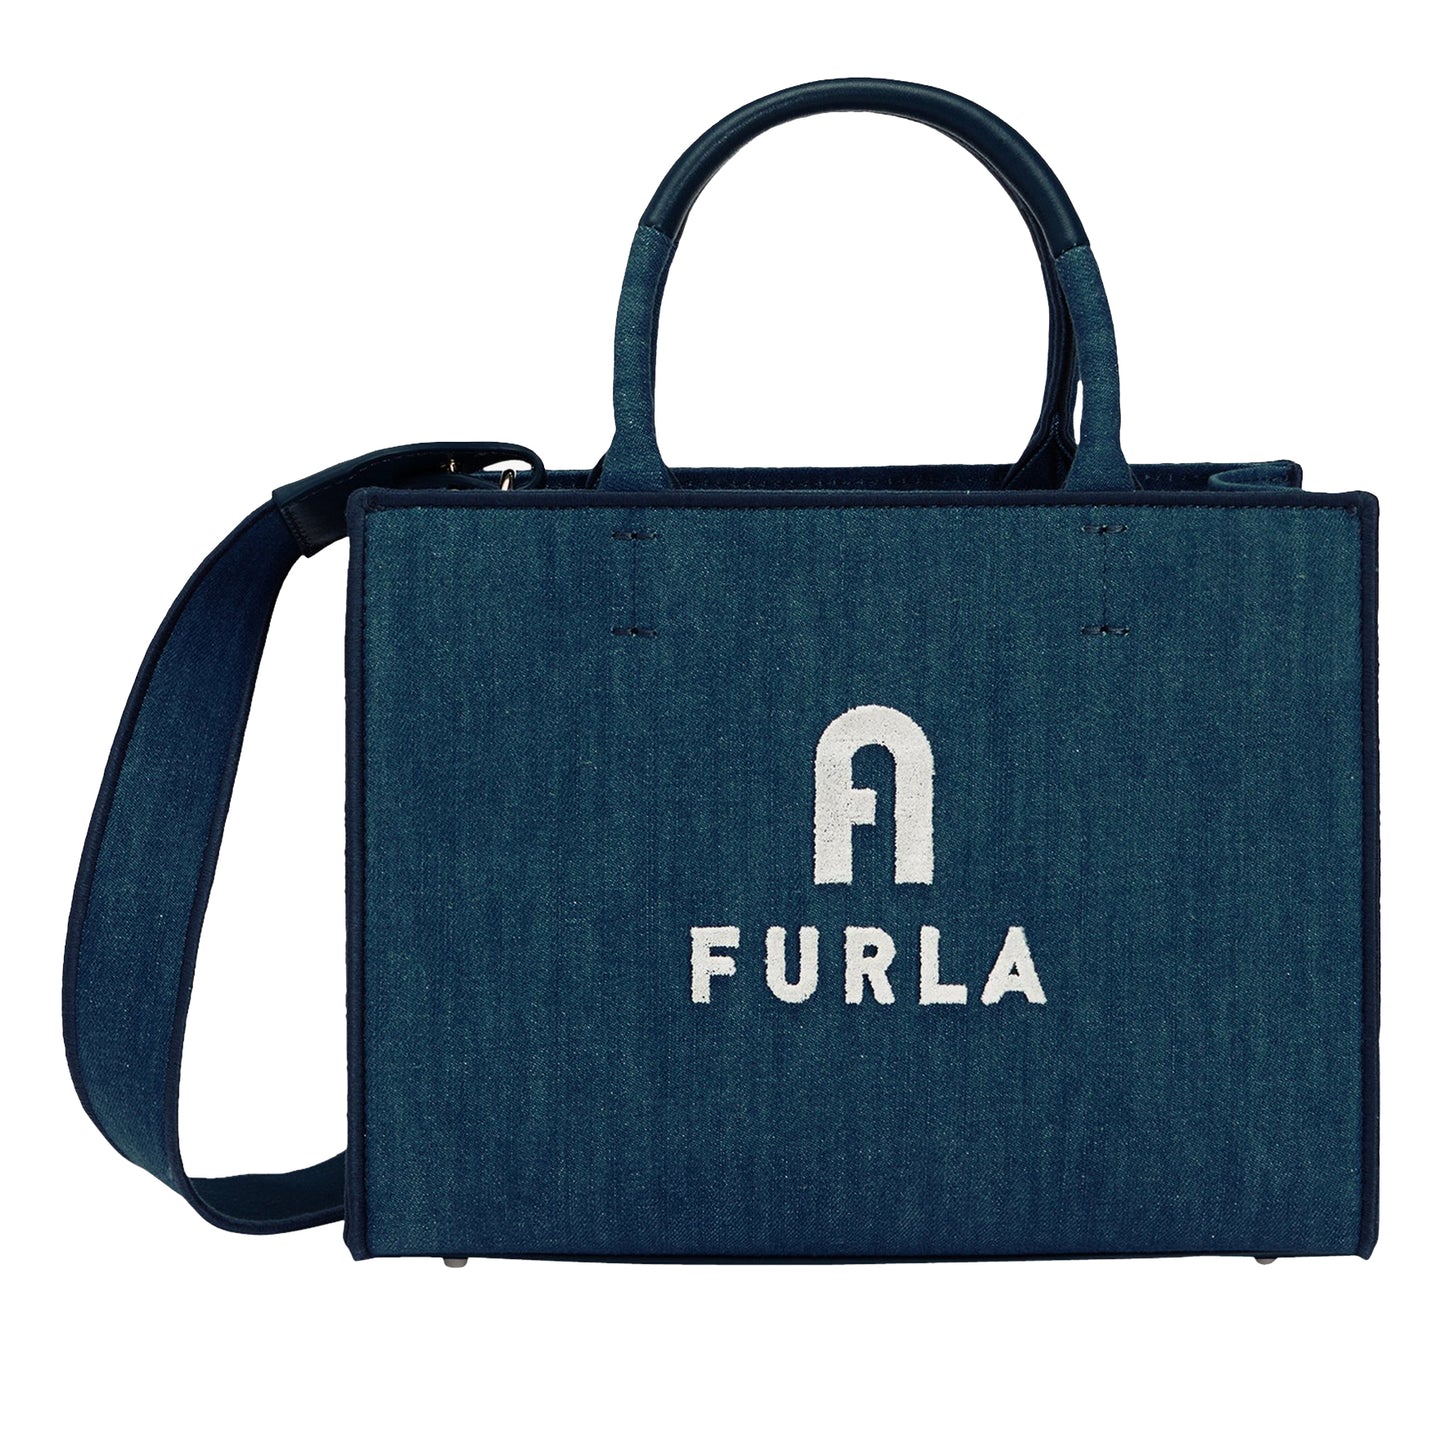 Furla Opportunity S Tote Blu Jay + Marshmellow OS